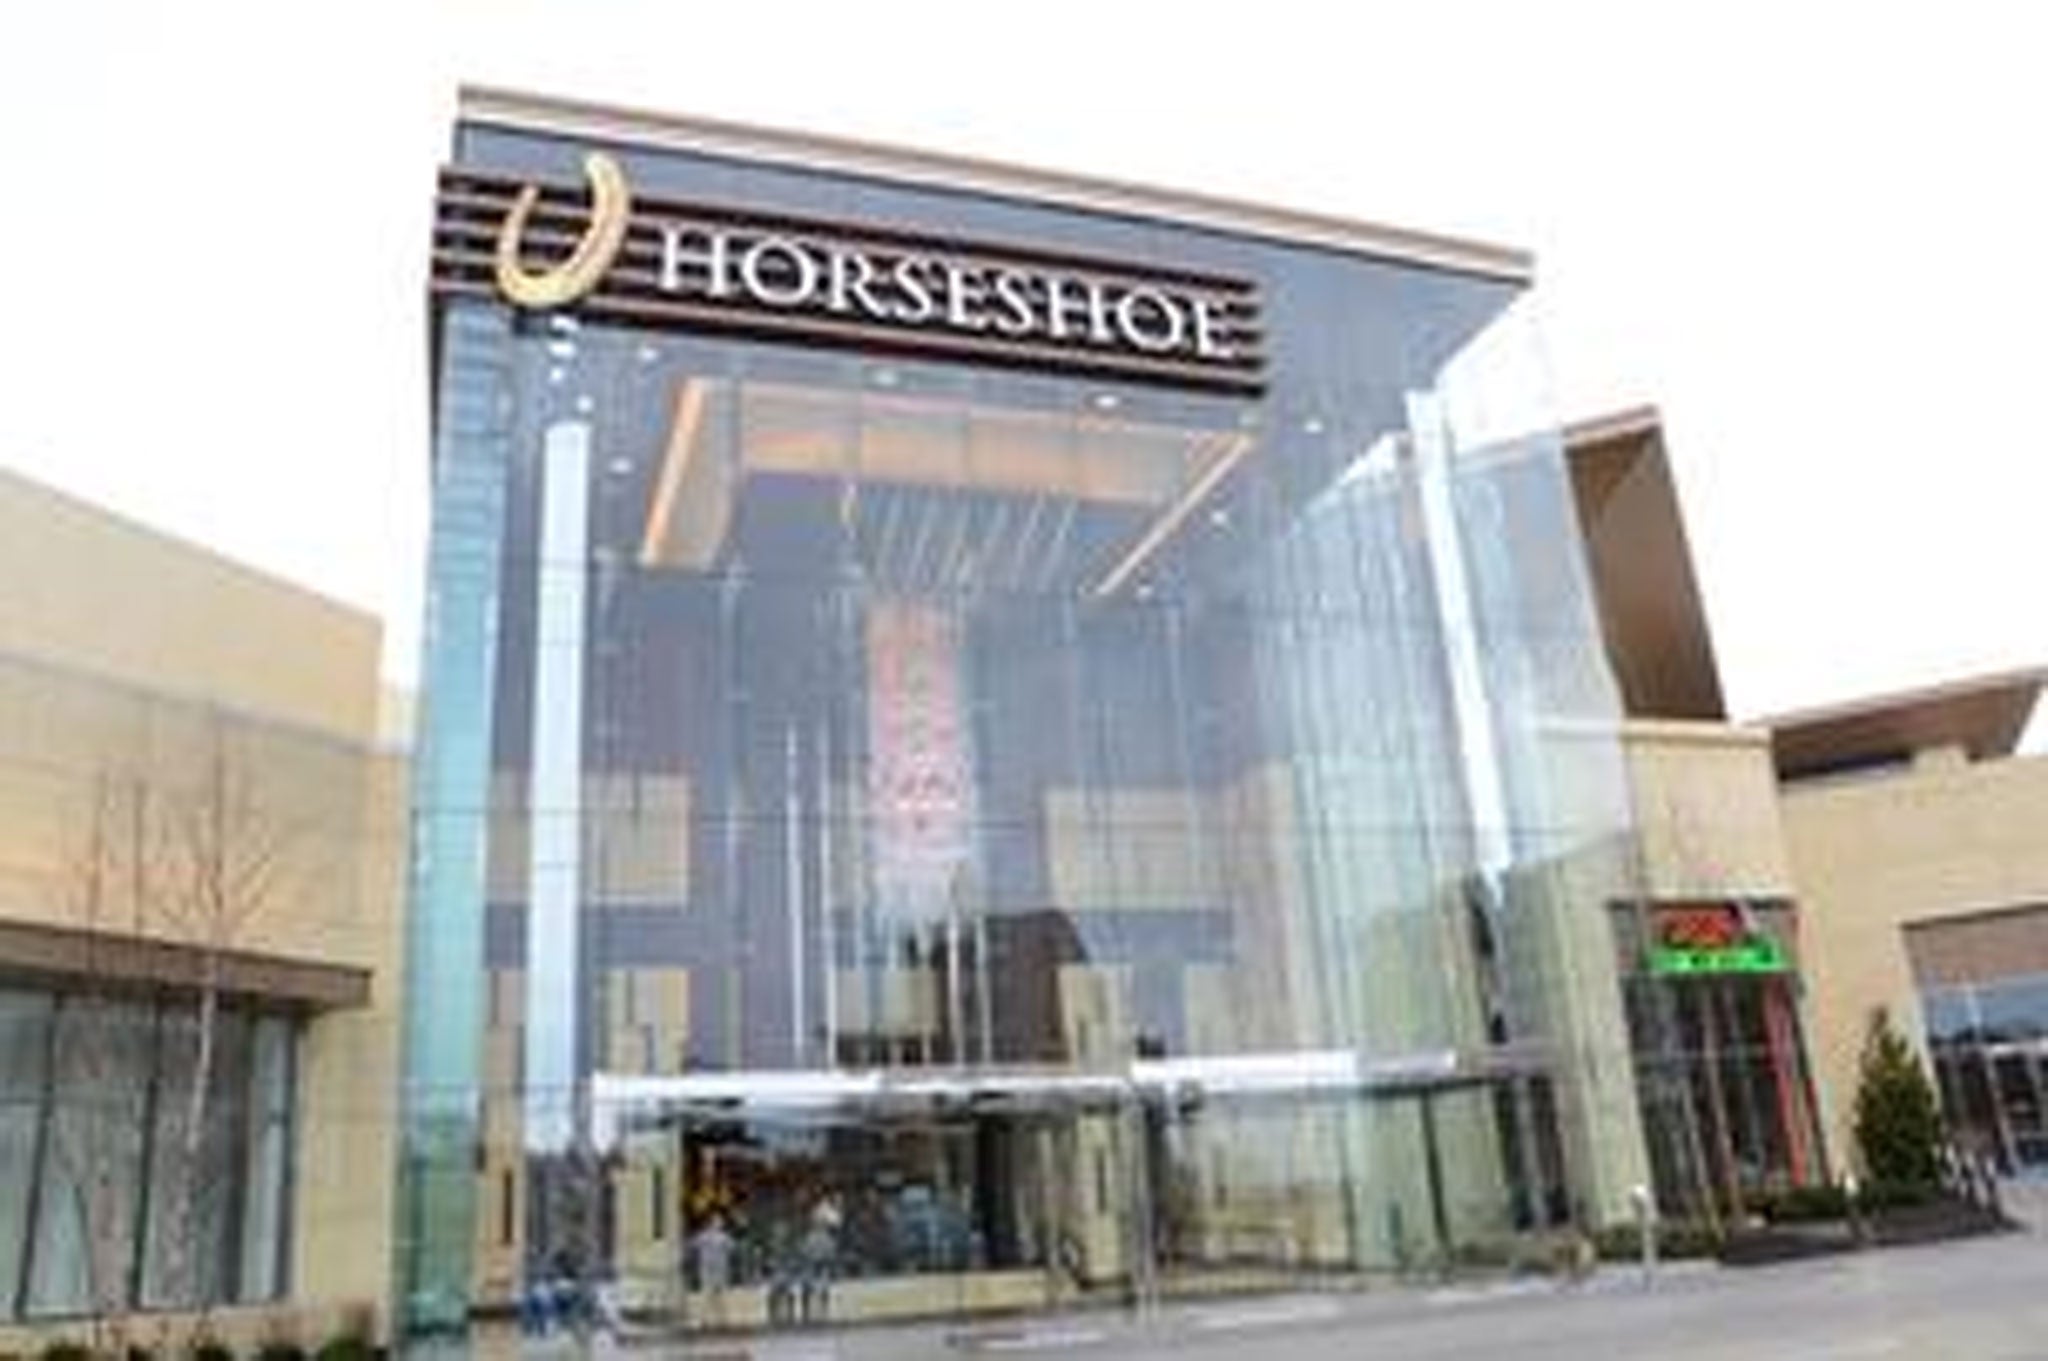 Last week the Horseshoe Casino in Cincinnati telephoned one of their patrons, a man named Kevin Lewis, to inform him he had $1 million to collect.